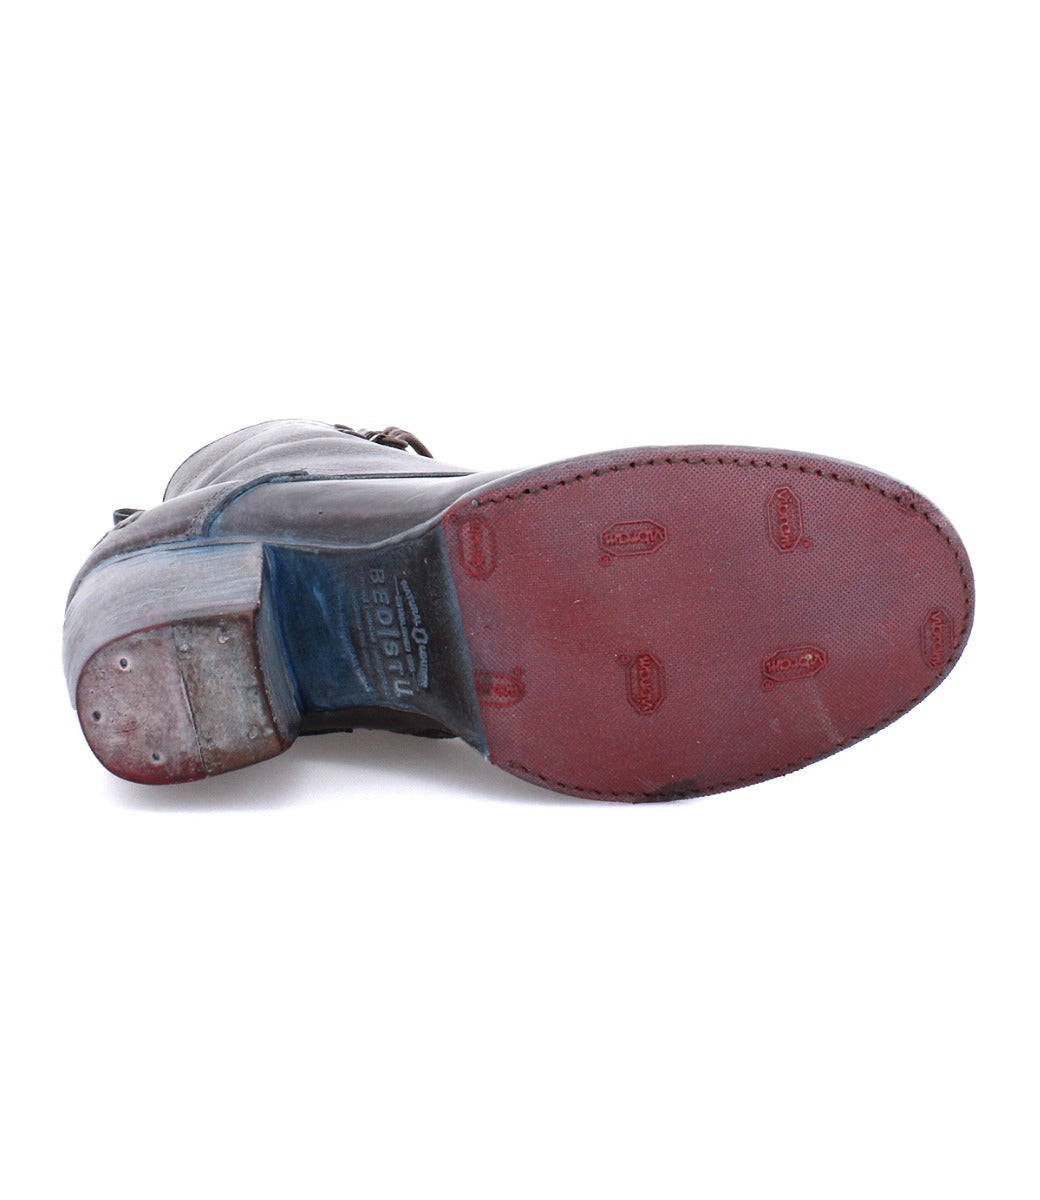 A pair of Judgement men's shoes with red and blue soles by Bed Stu.